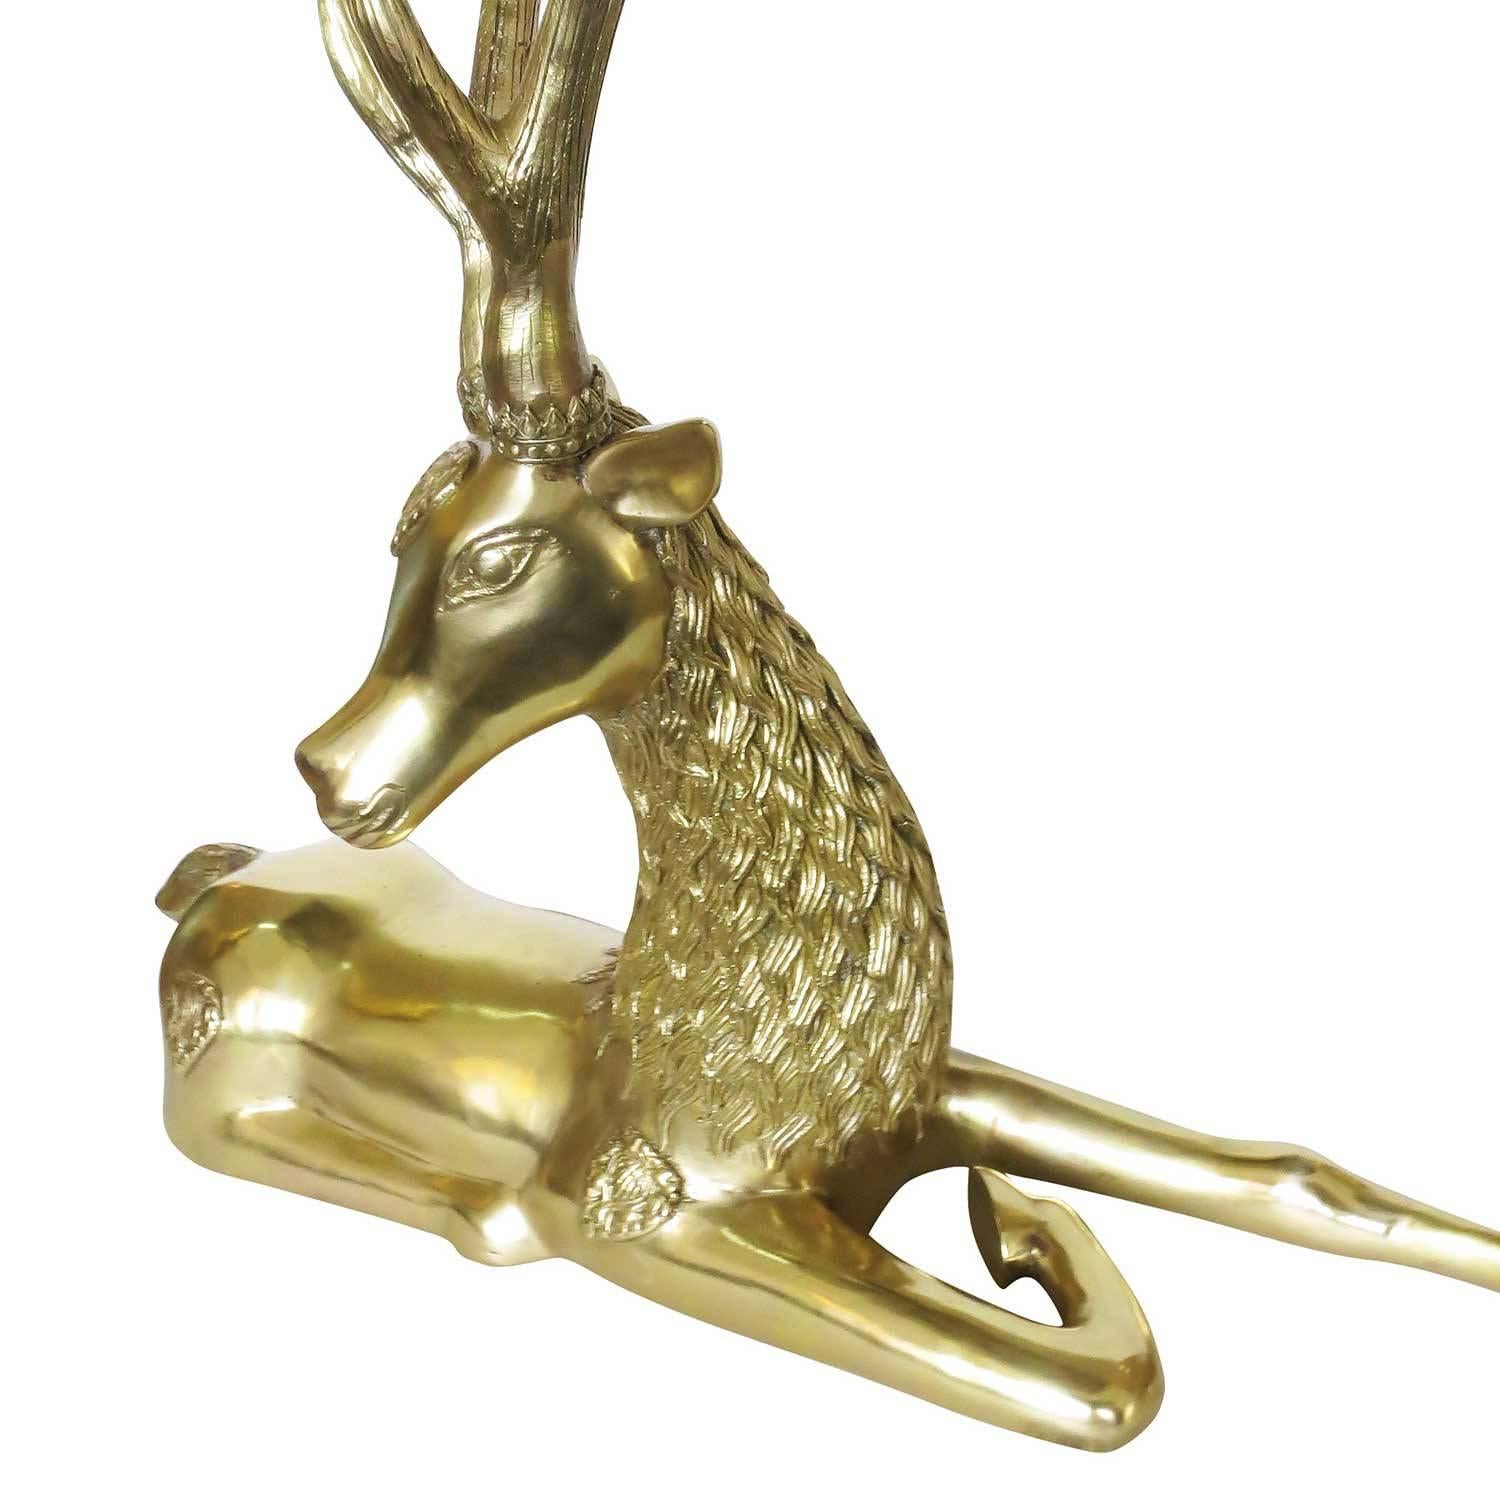 Post-Modern 1970s Brass Deer with Fanciful Decorative accents by Sarreid Ltd.